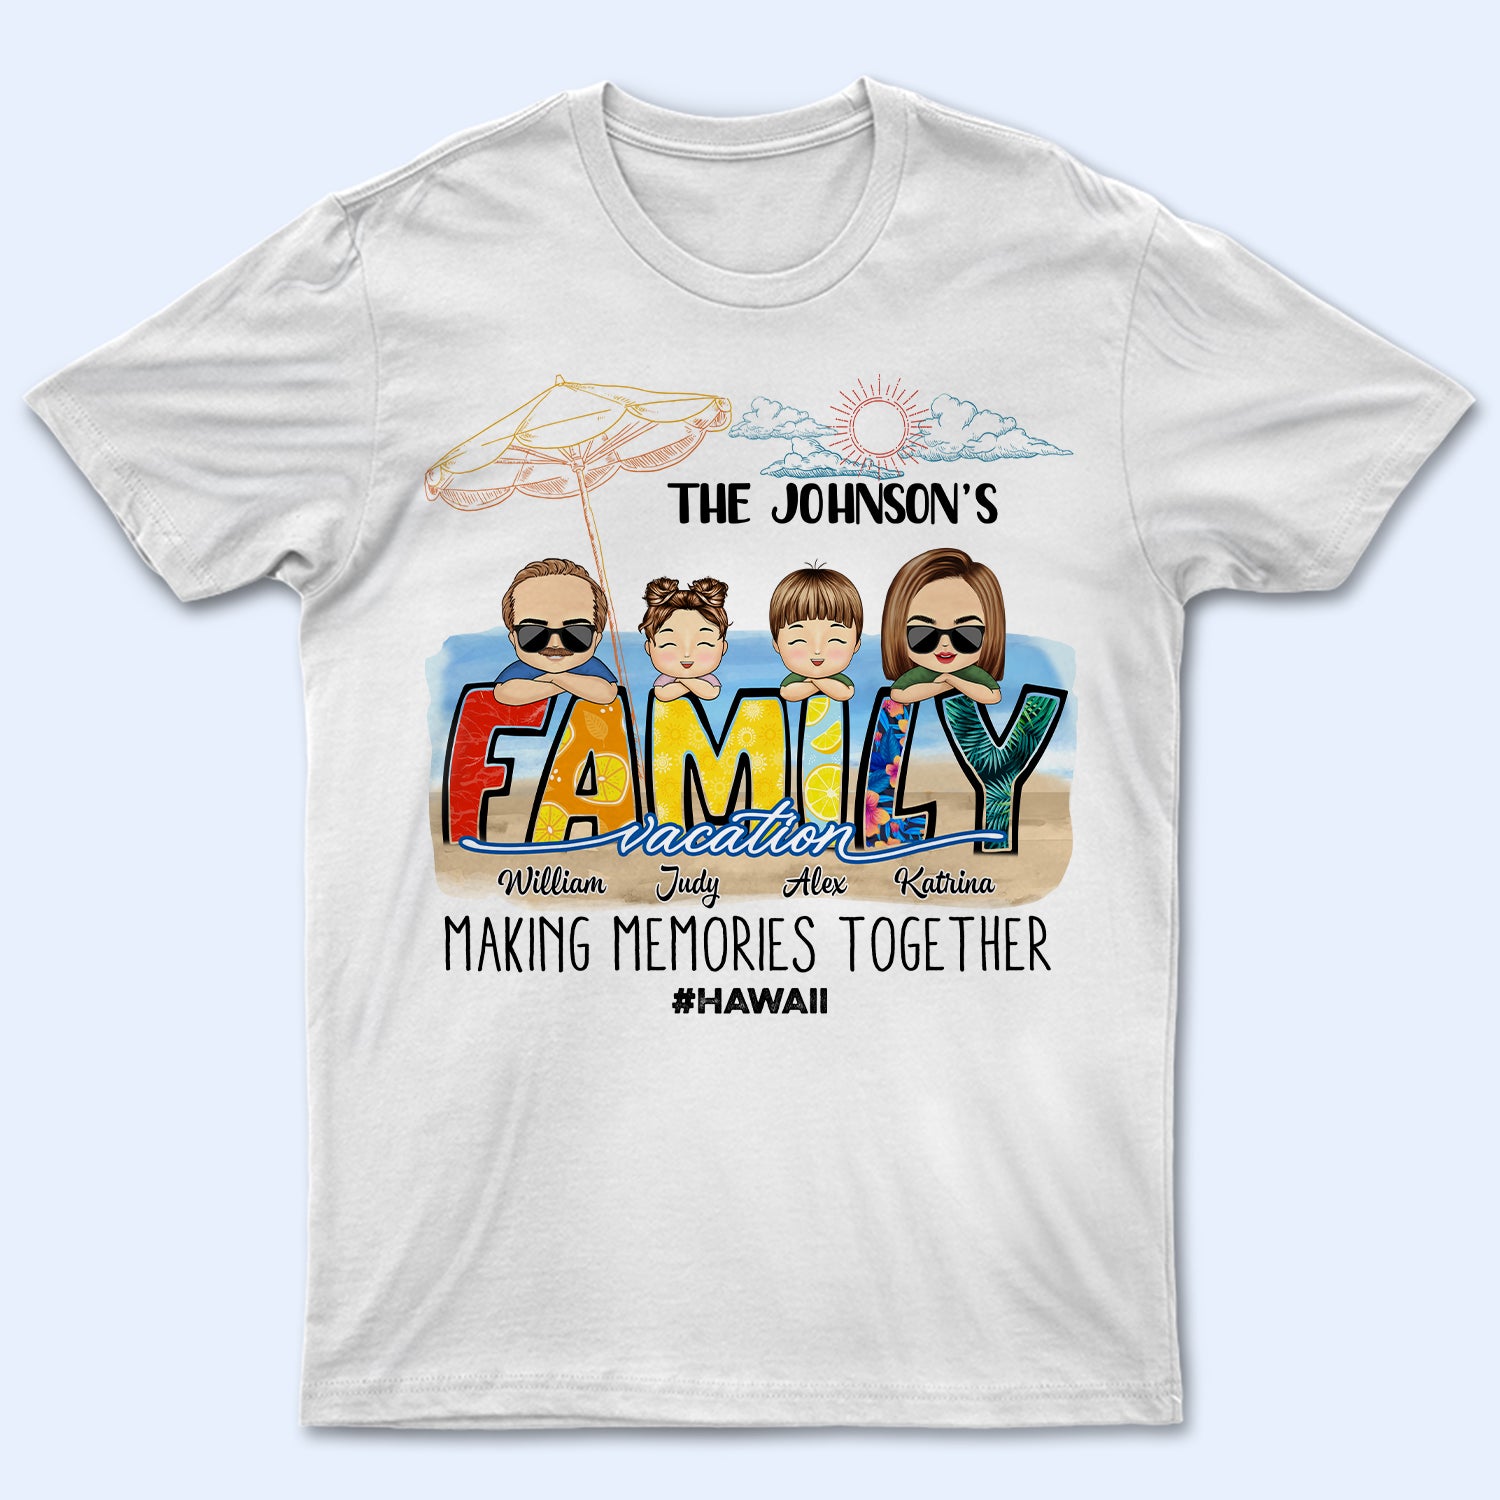 Family Vacation Making Memories Together - Birthday, Anniversary, Travel Gift For Grandma, Grandpa, Mom, Dad, Matching Item For Family Trip - Personalized T Shirt